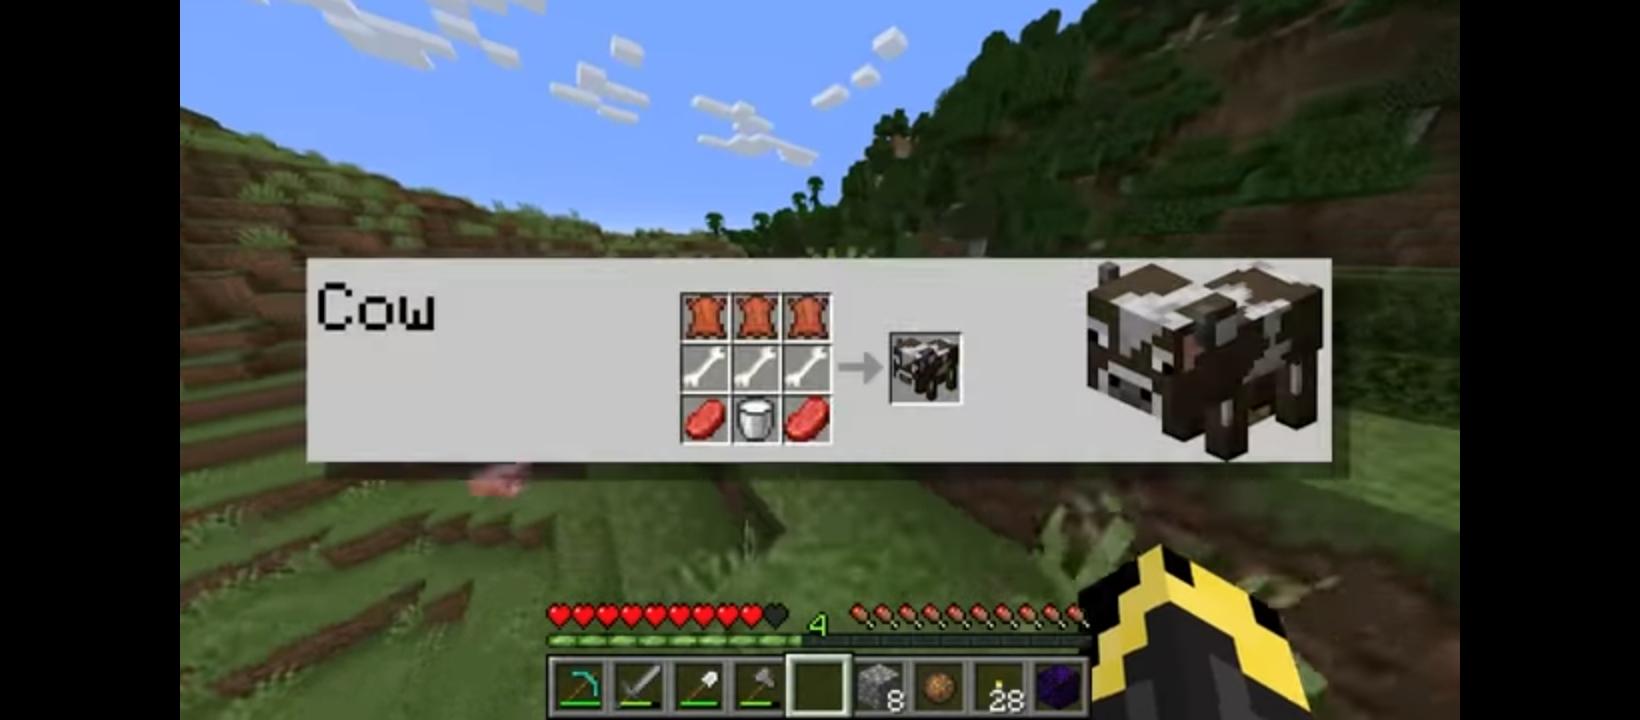 Minecraft Memes - New 1.20 crafting recipes looking pretty interesting...